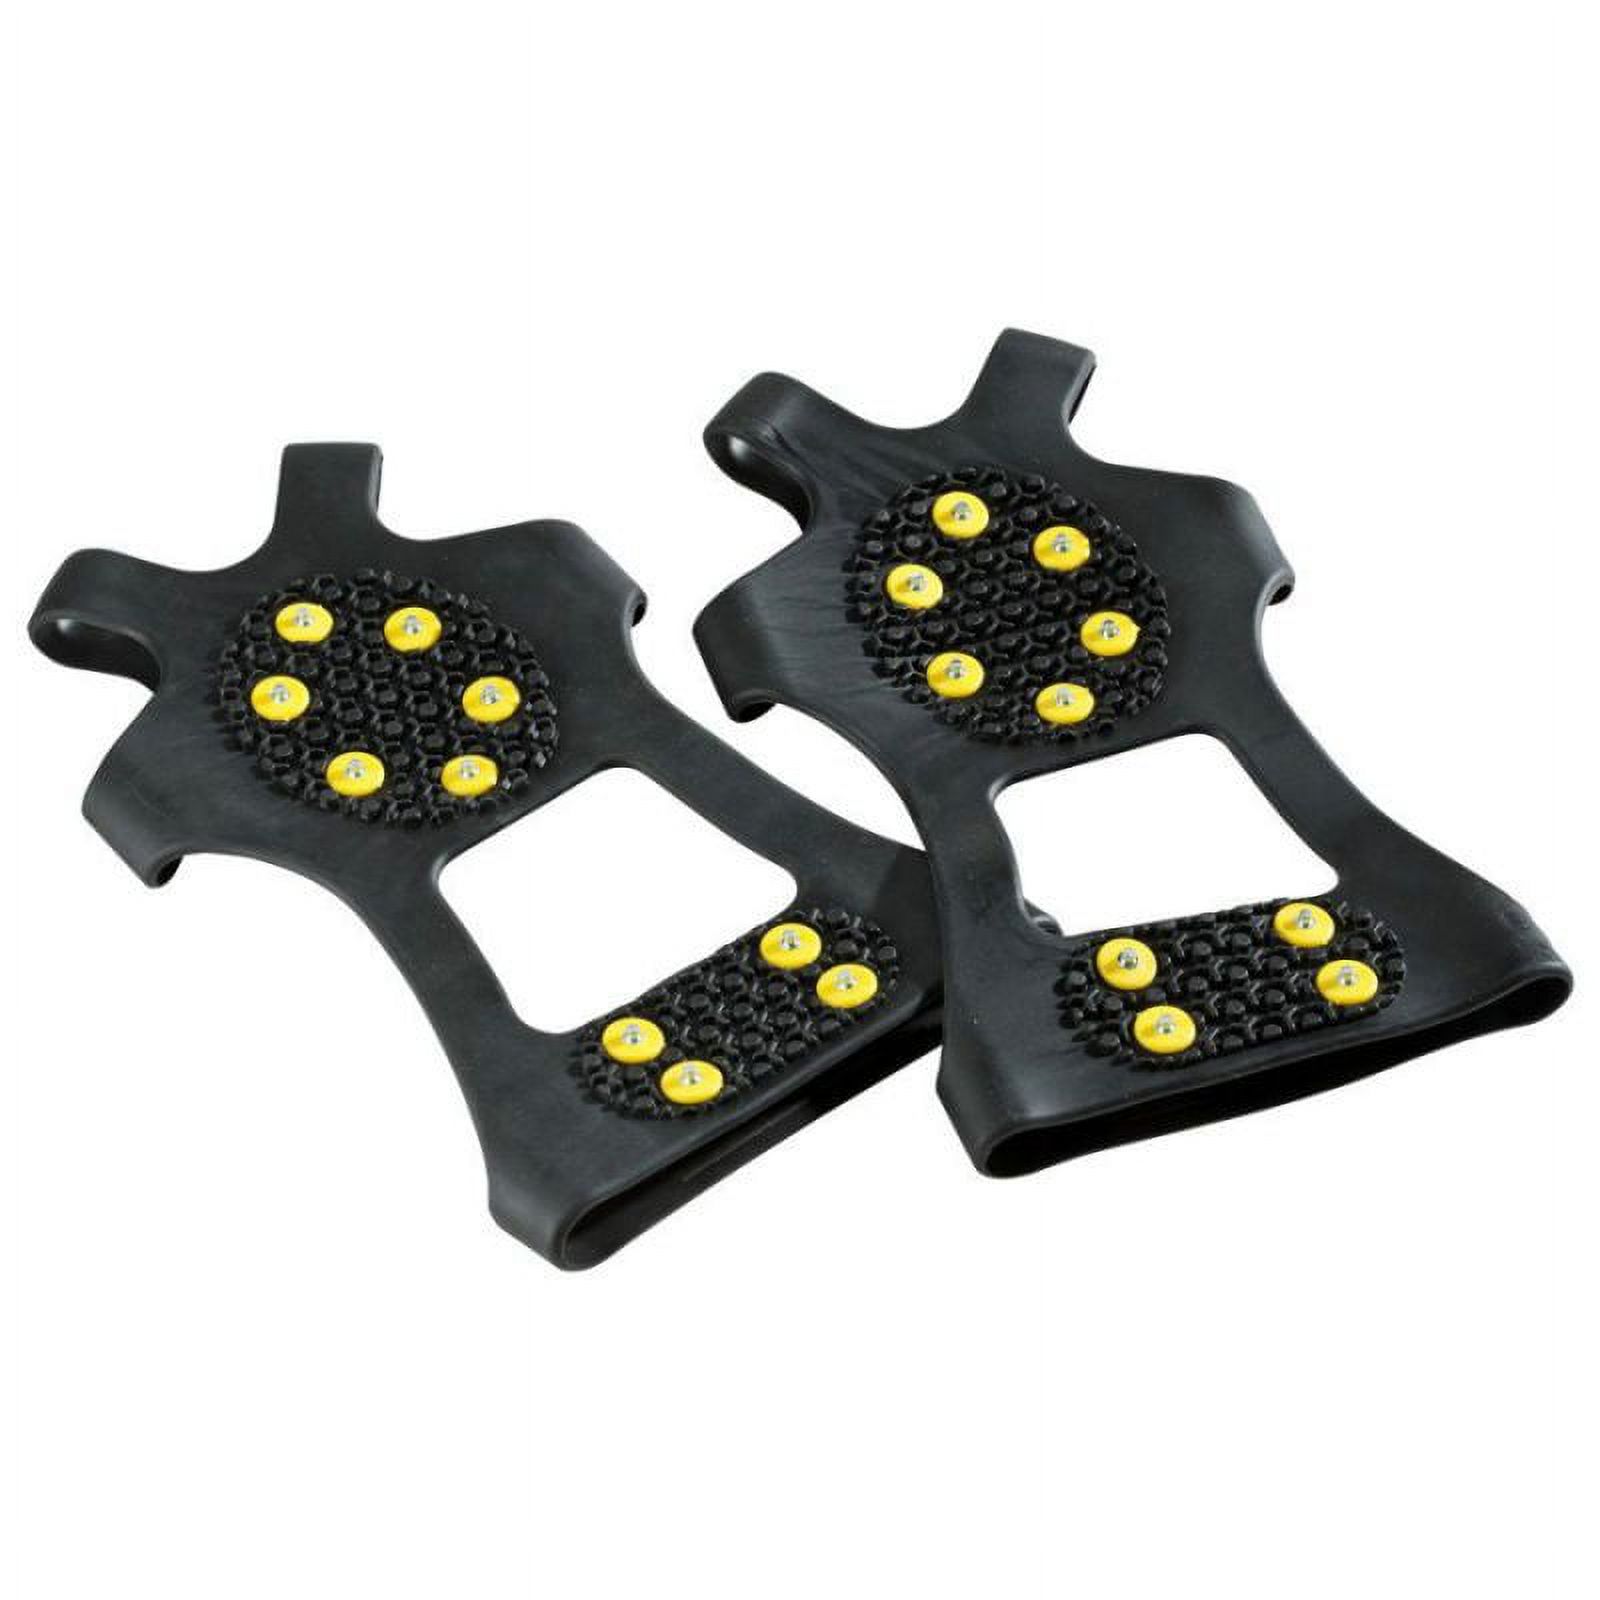 1 Pair 10 Studs Anti-Skid Snow Ice Climbing Shoe Grips Crampons Cleats Overshoes crampons spike shoes crampon - image 1 of 6